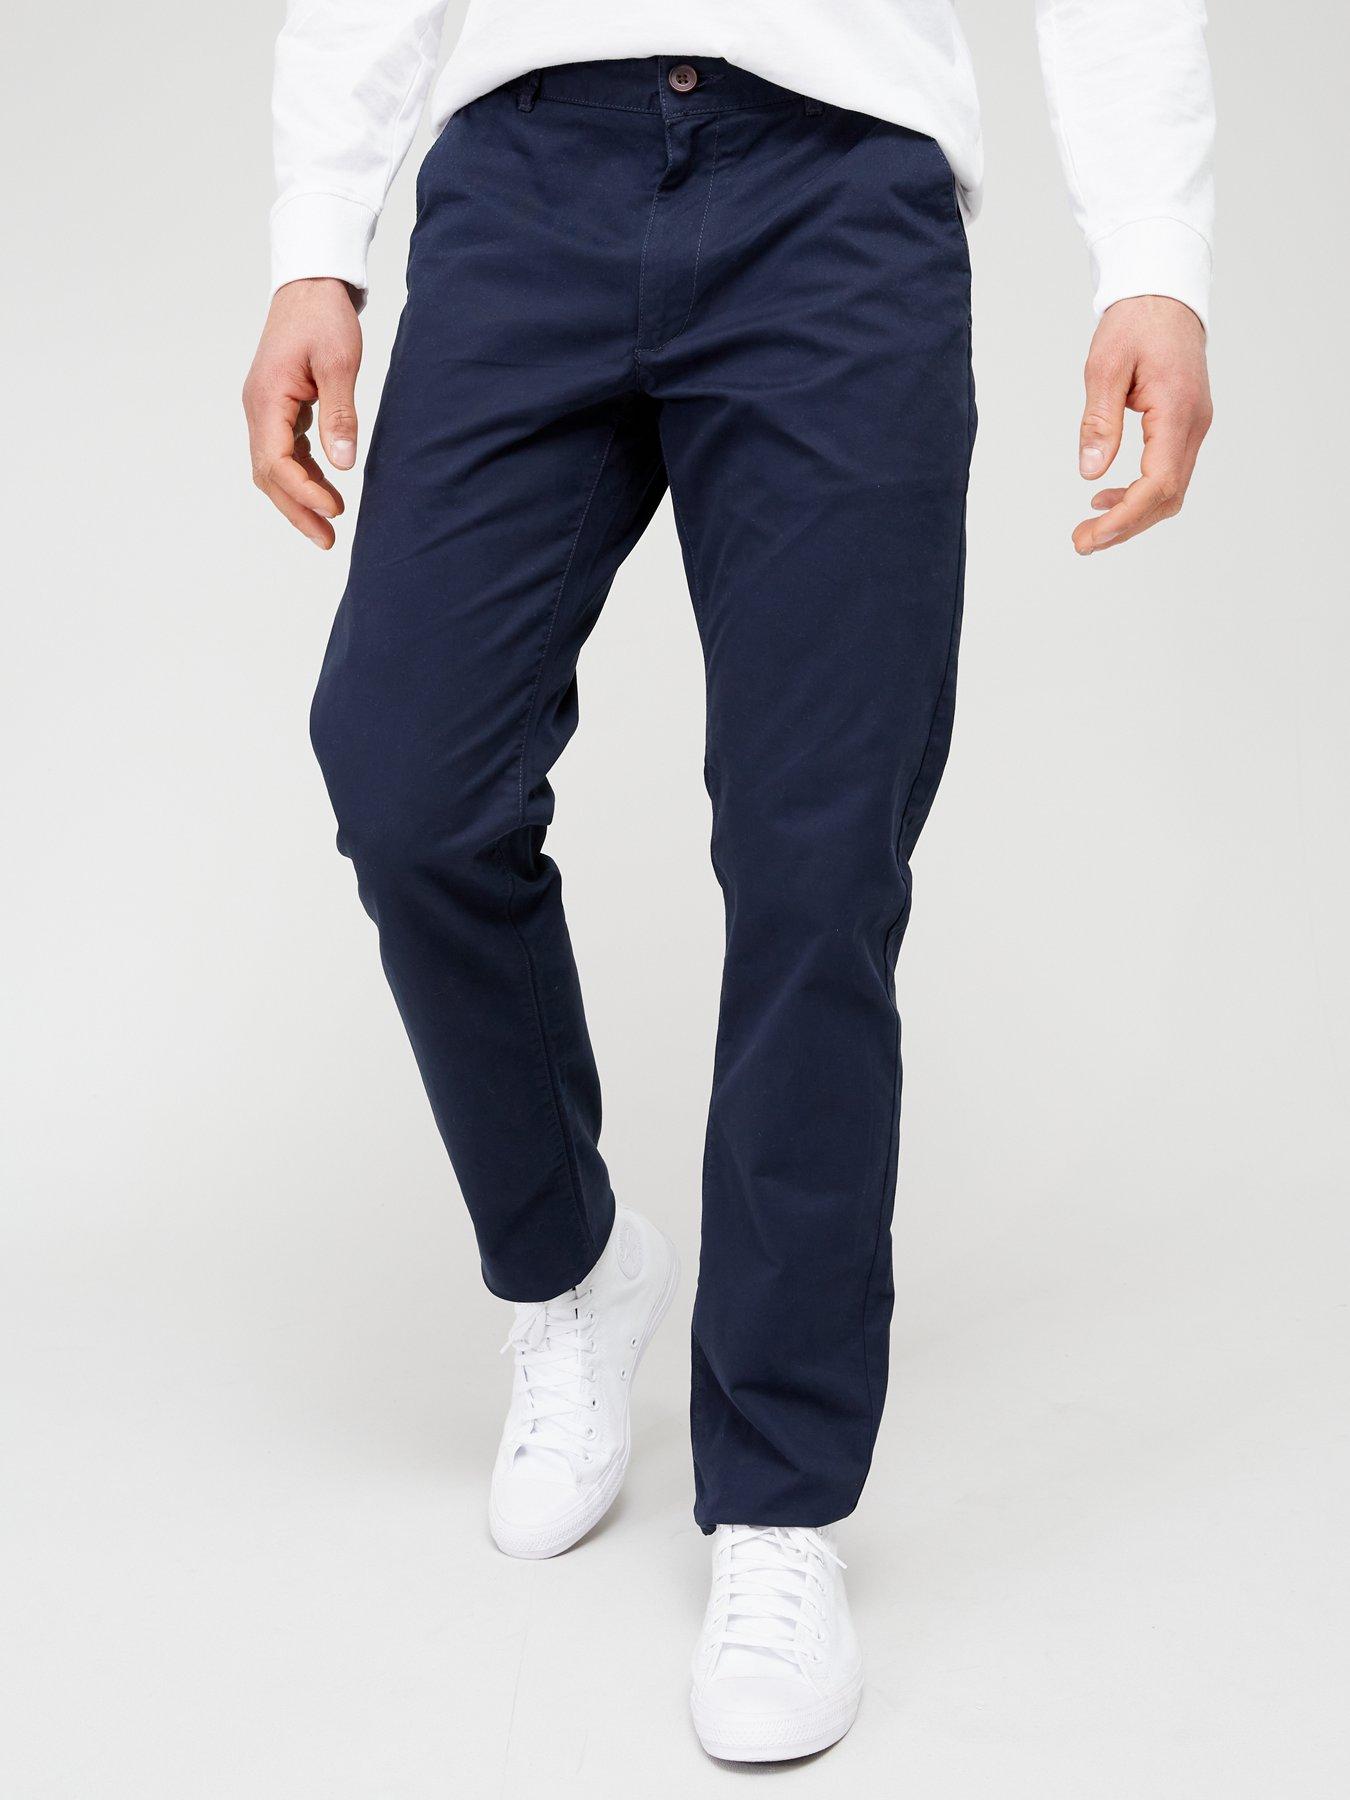 Farah Elm Slim Fit Chino Trousers - Navy | very.co.uk